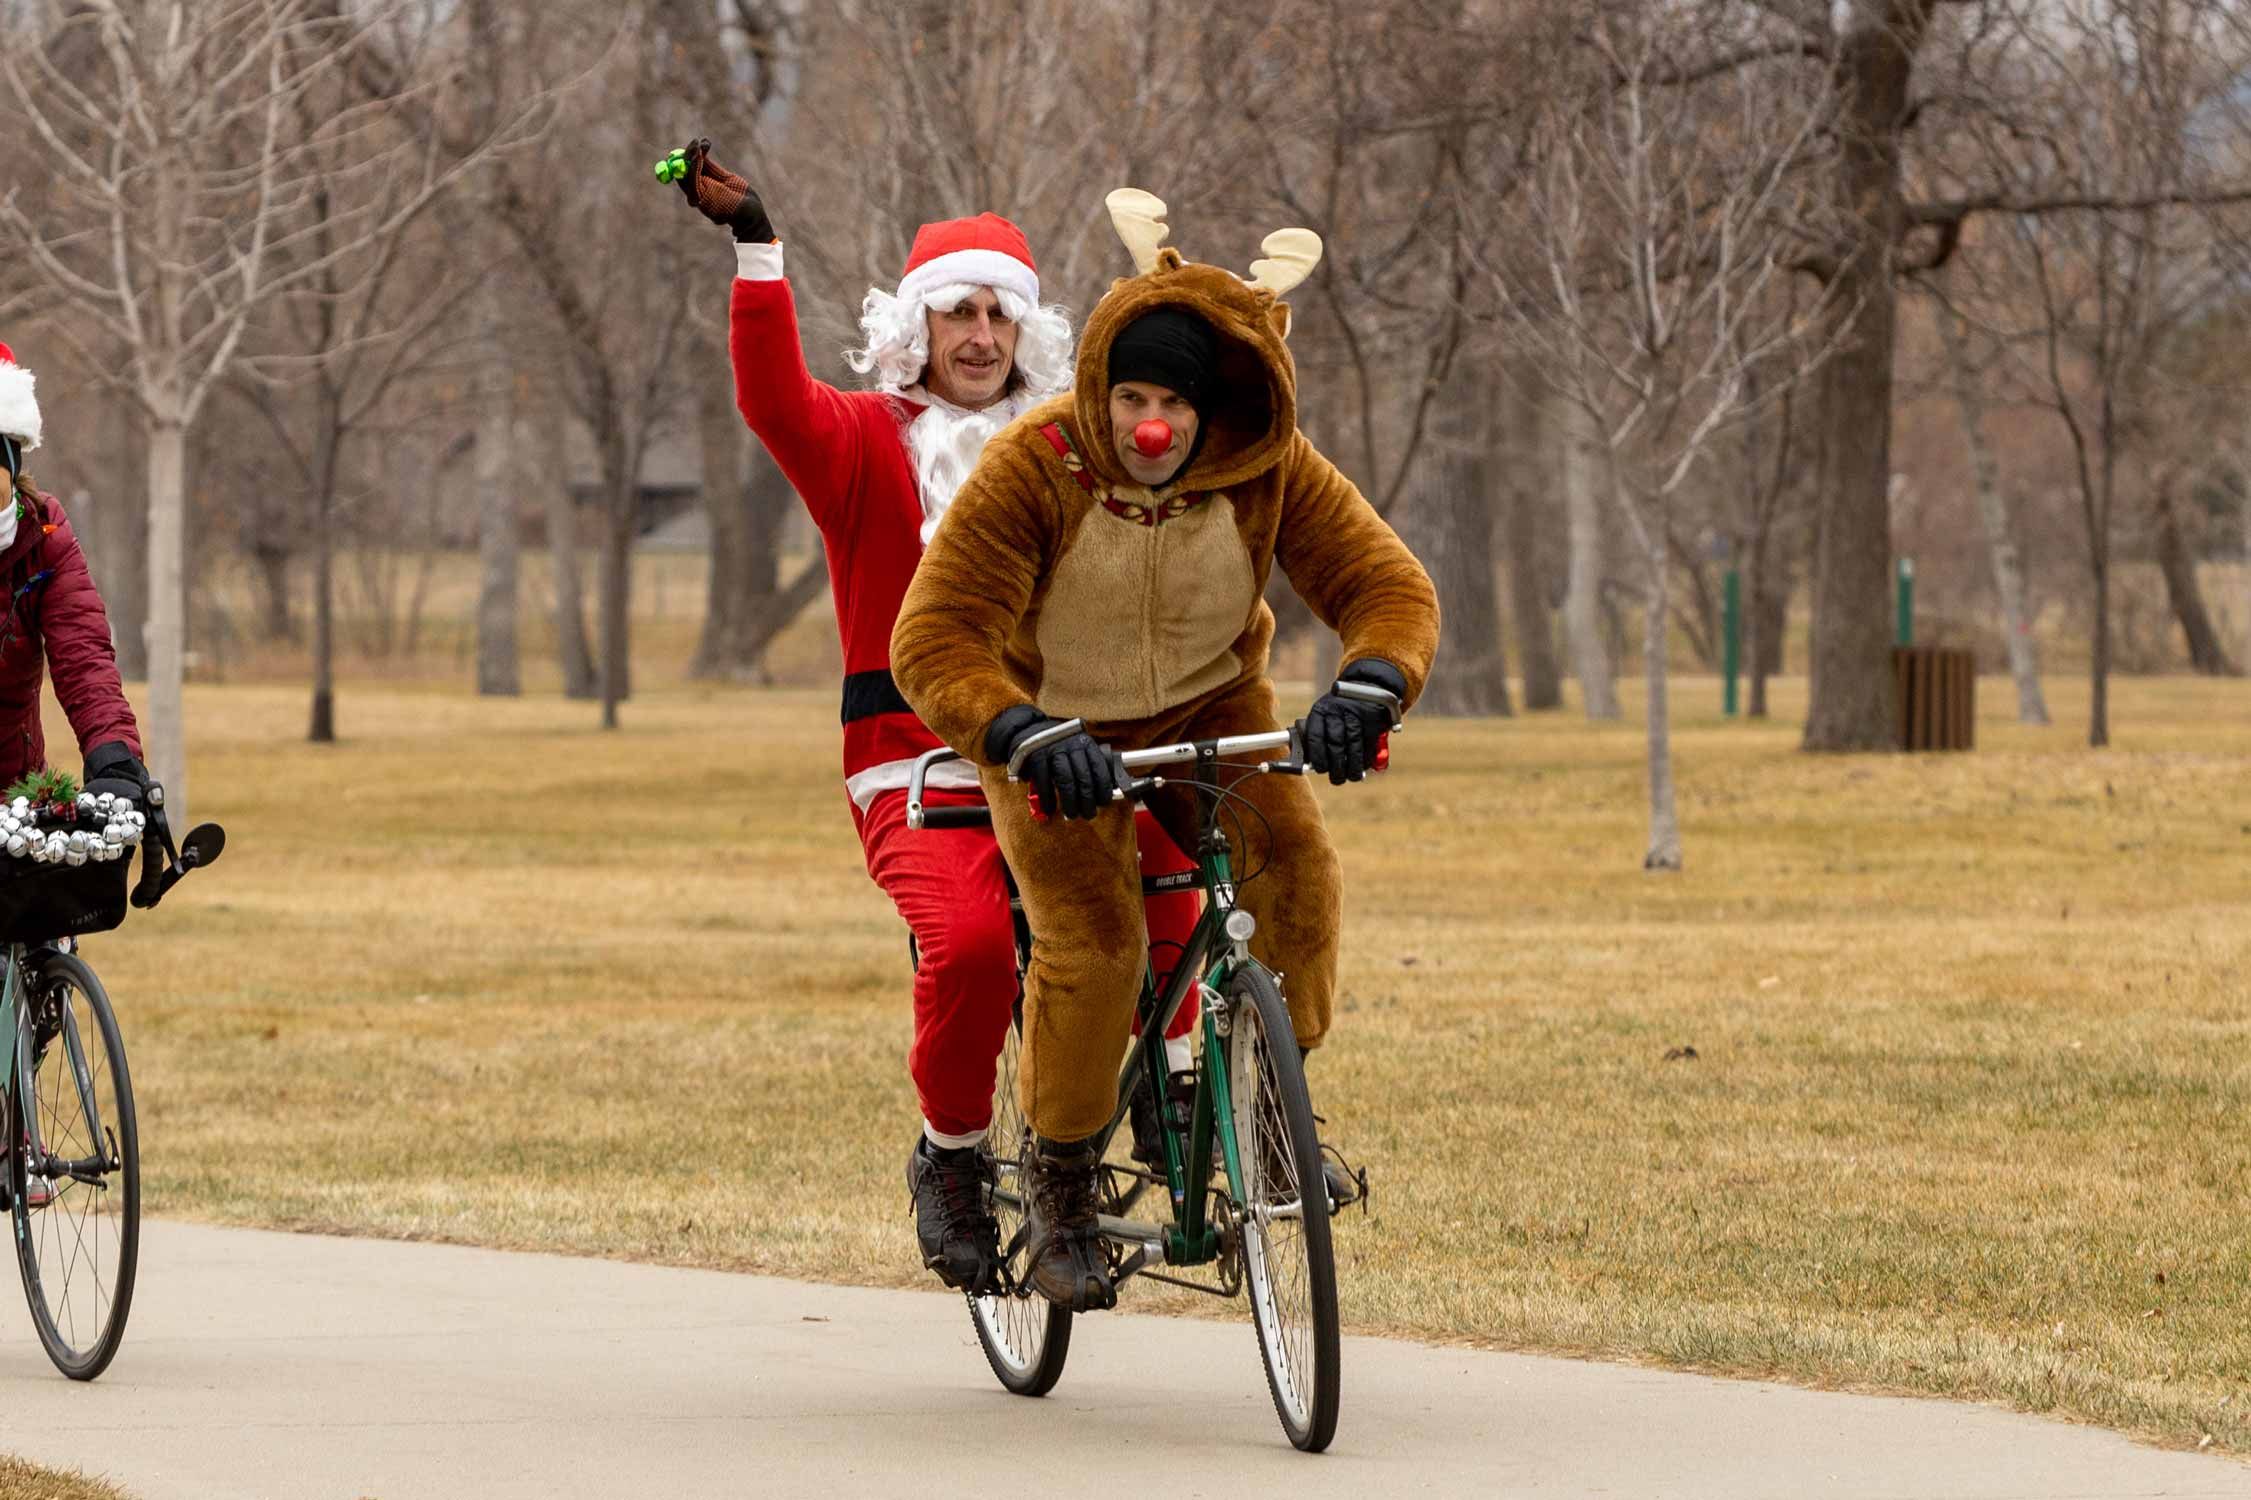 Men dressed as Santa Claus and Rudolph the Red Nosed Reindeer ride a tandem bike in a park